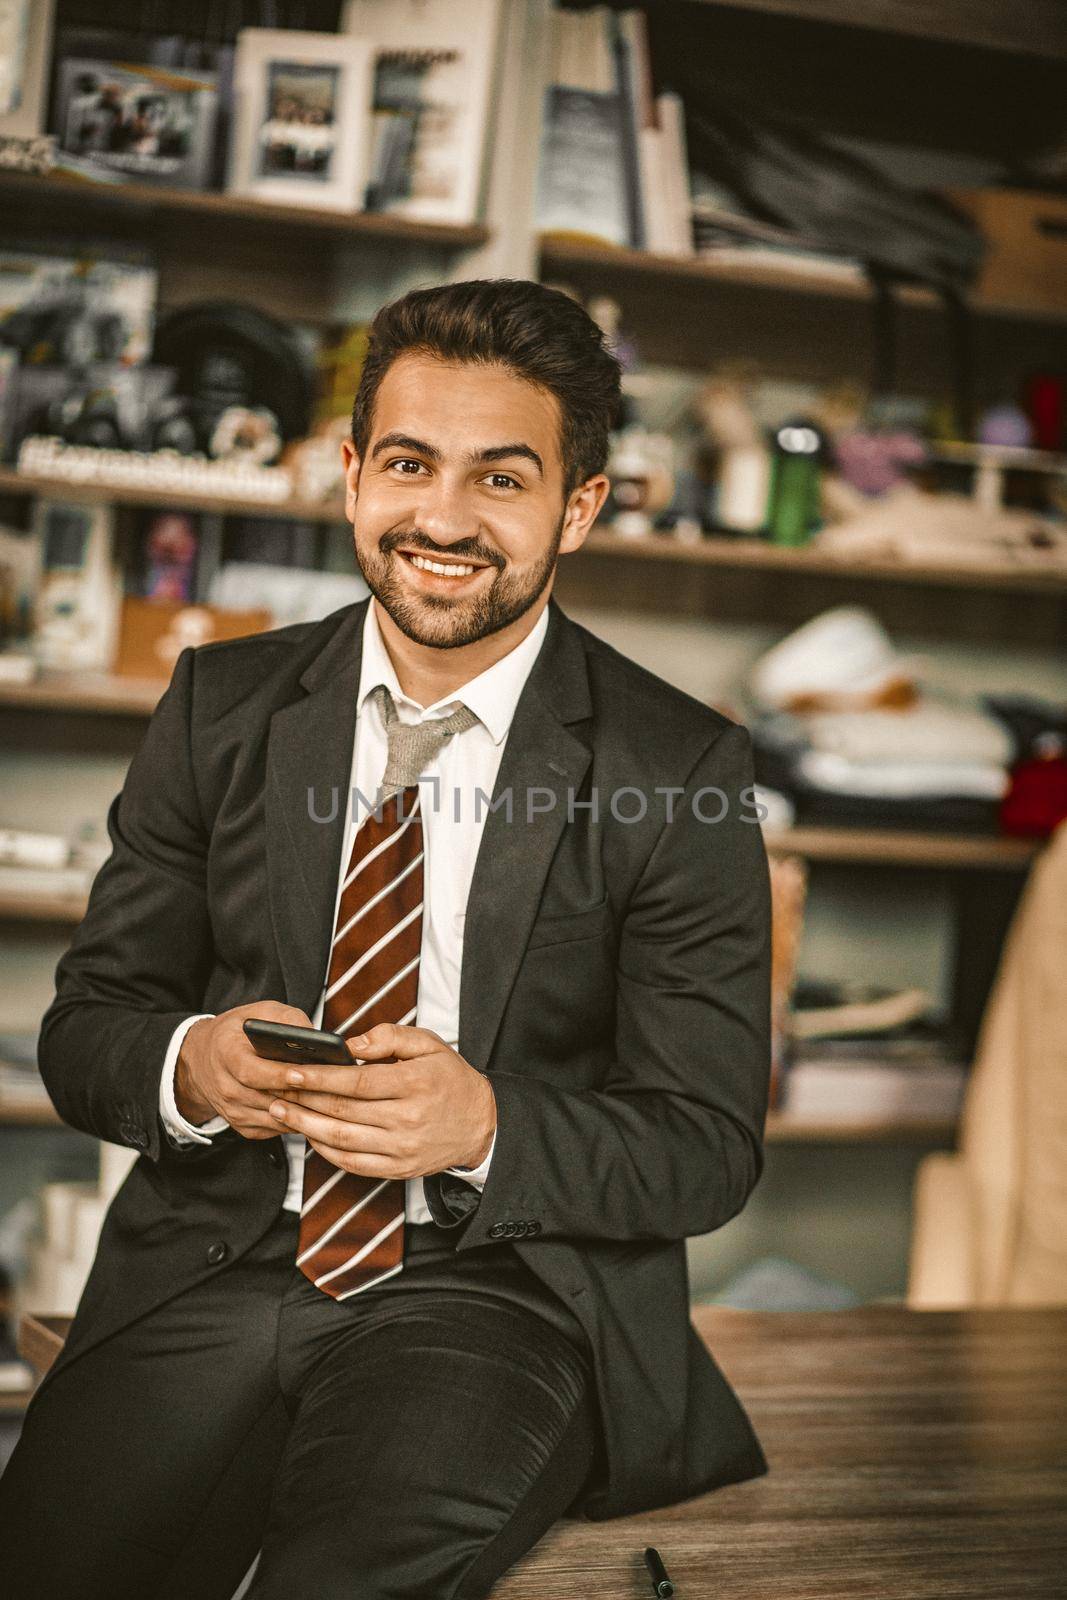 Well-dressed Business Man Relaxing During Office Break, Smiling Entrepreneur Looks At Camera Holding Mobile Phone While Sitting On Table, Handsome Man In Formalwear Chatting By Phone, Toned Image